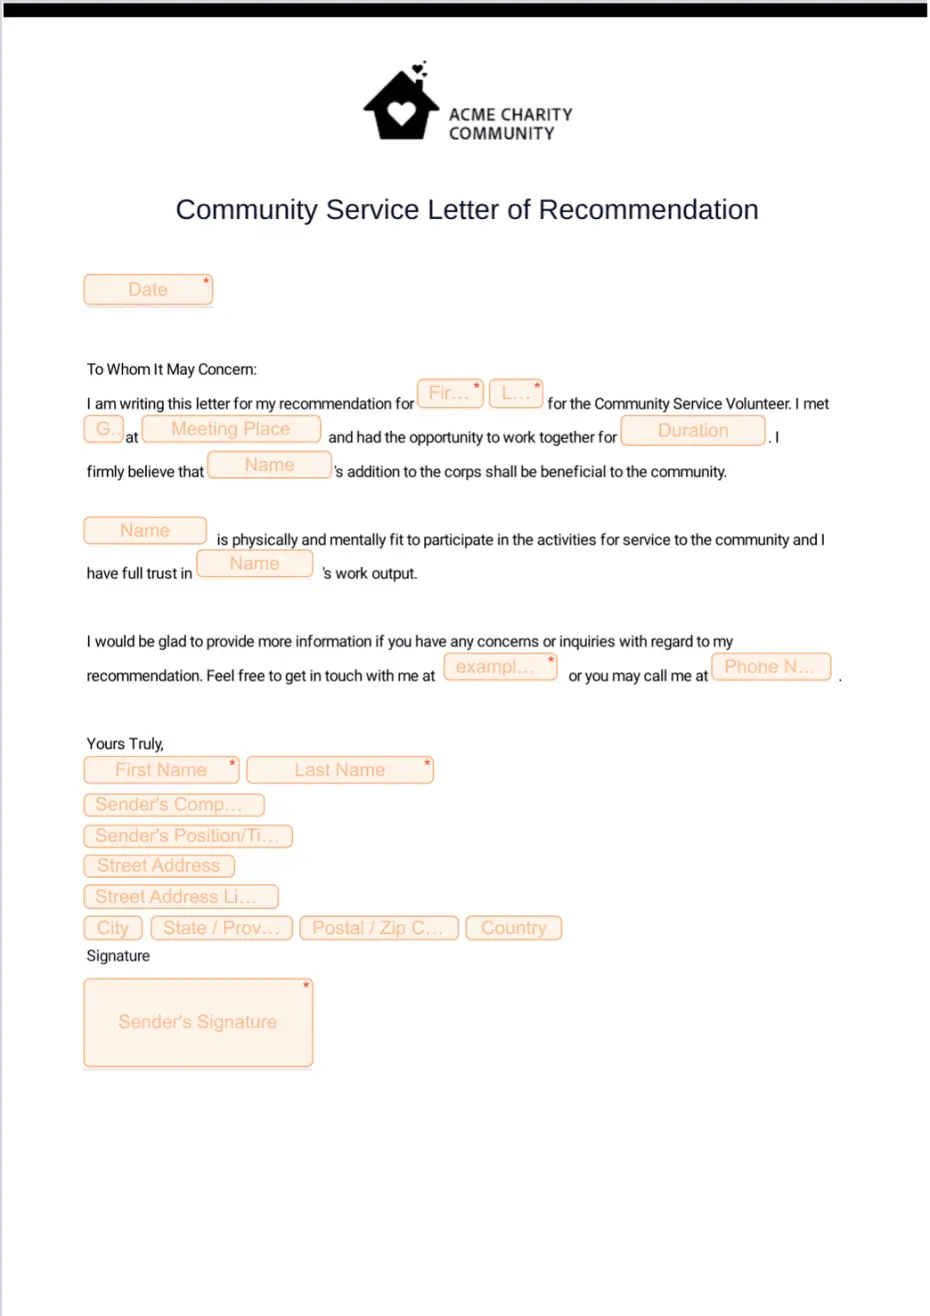 Community Service Letter of Recommendation